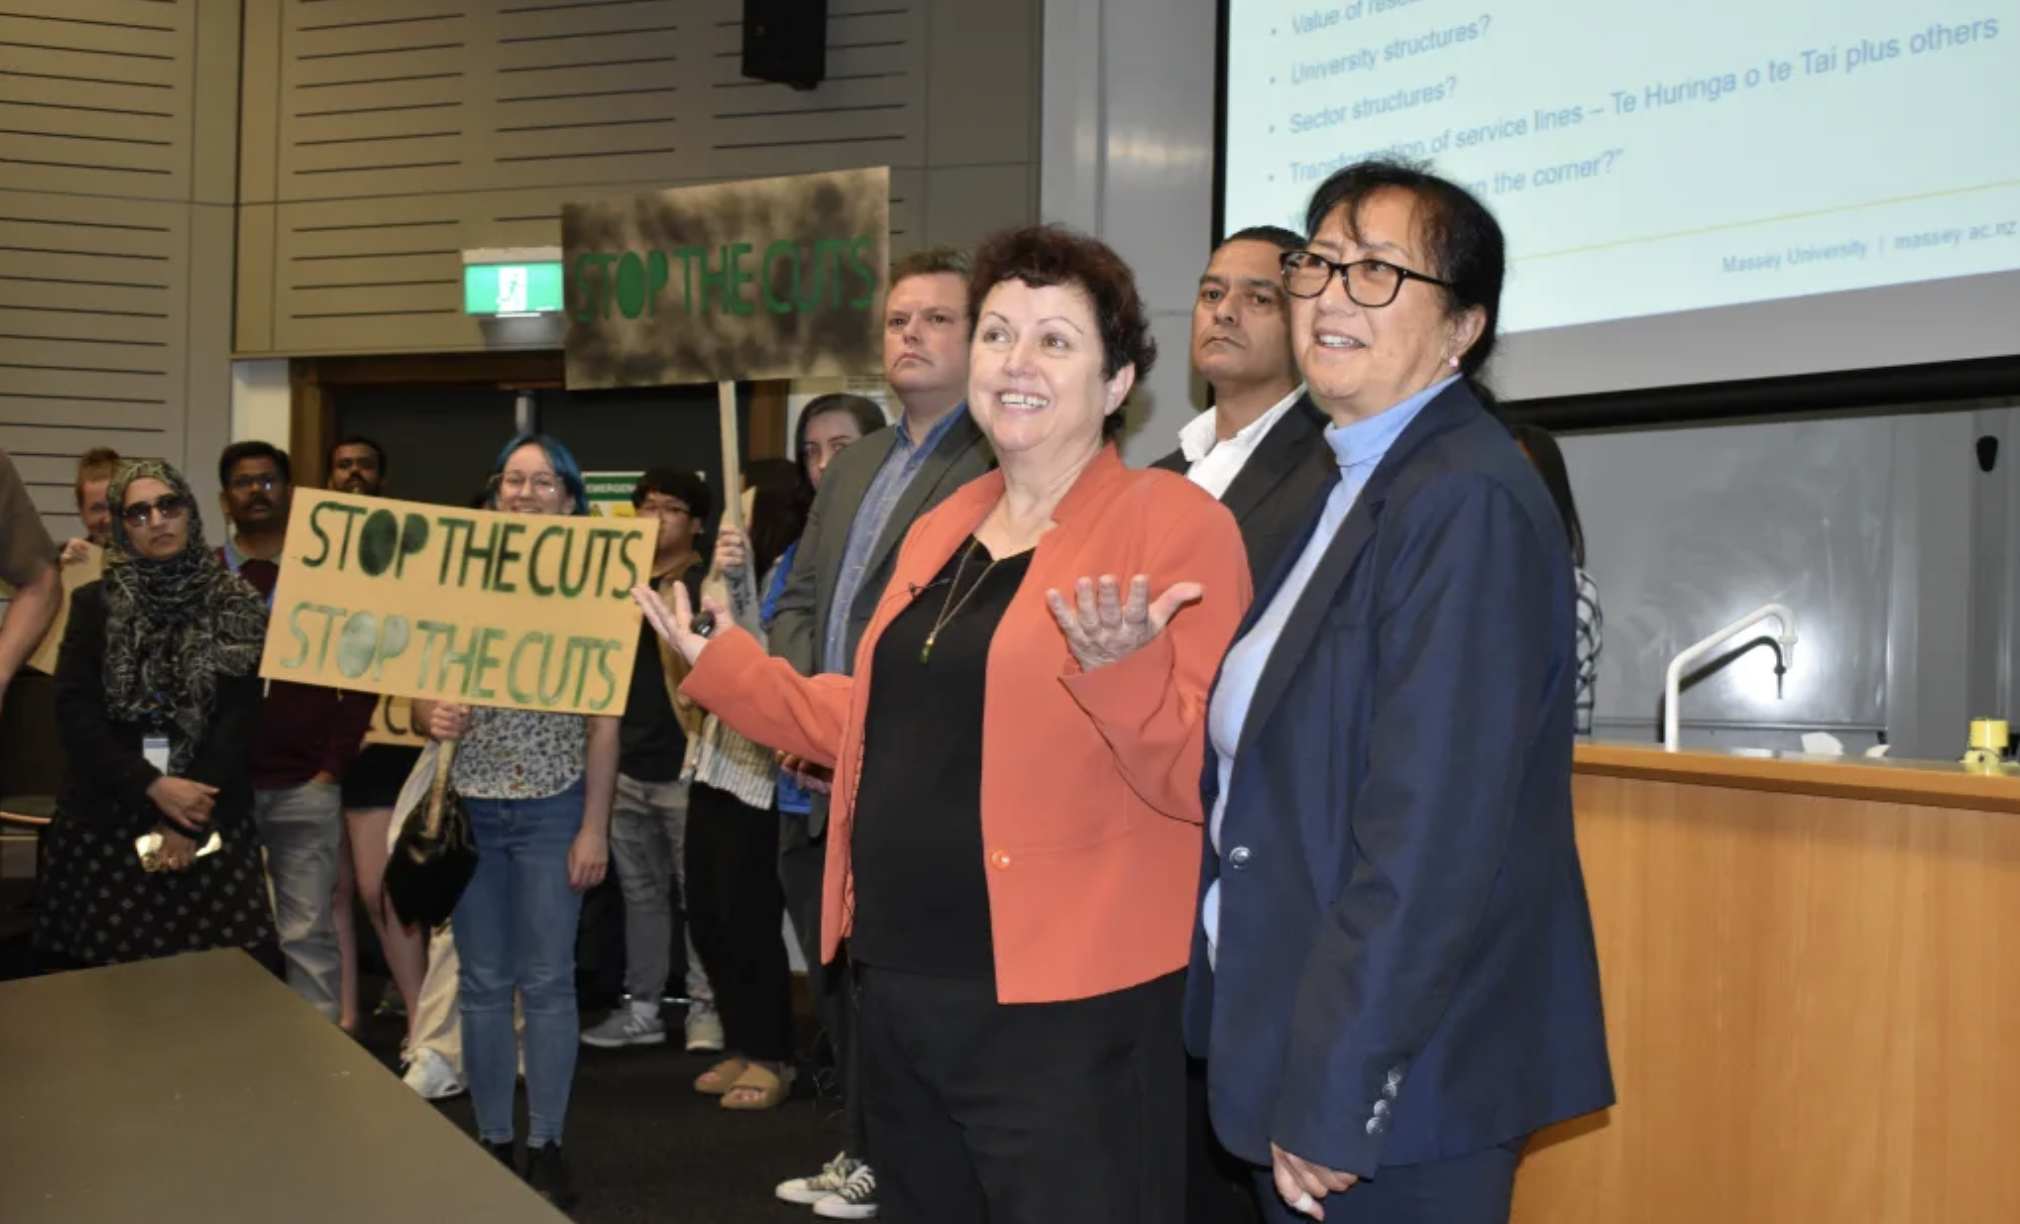 Staff and student protesters entered a meeting at Massey University's campus to demonstrate...